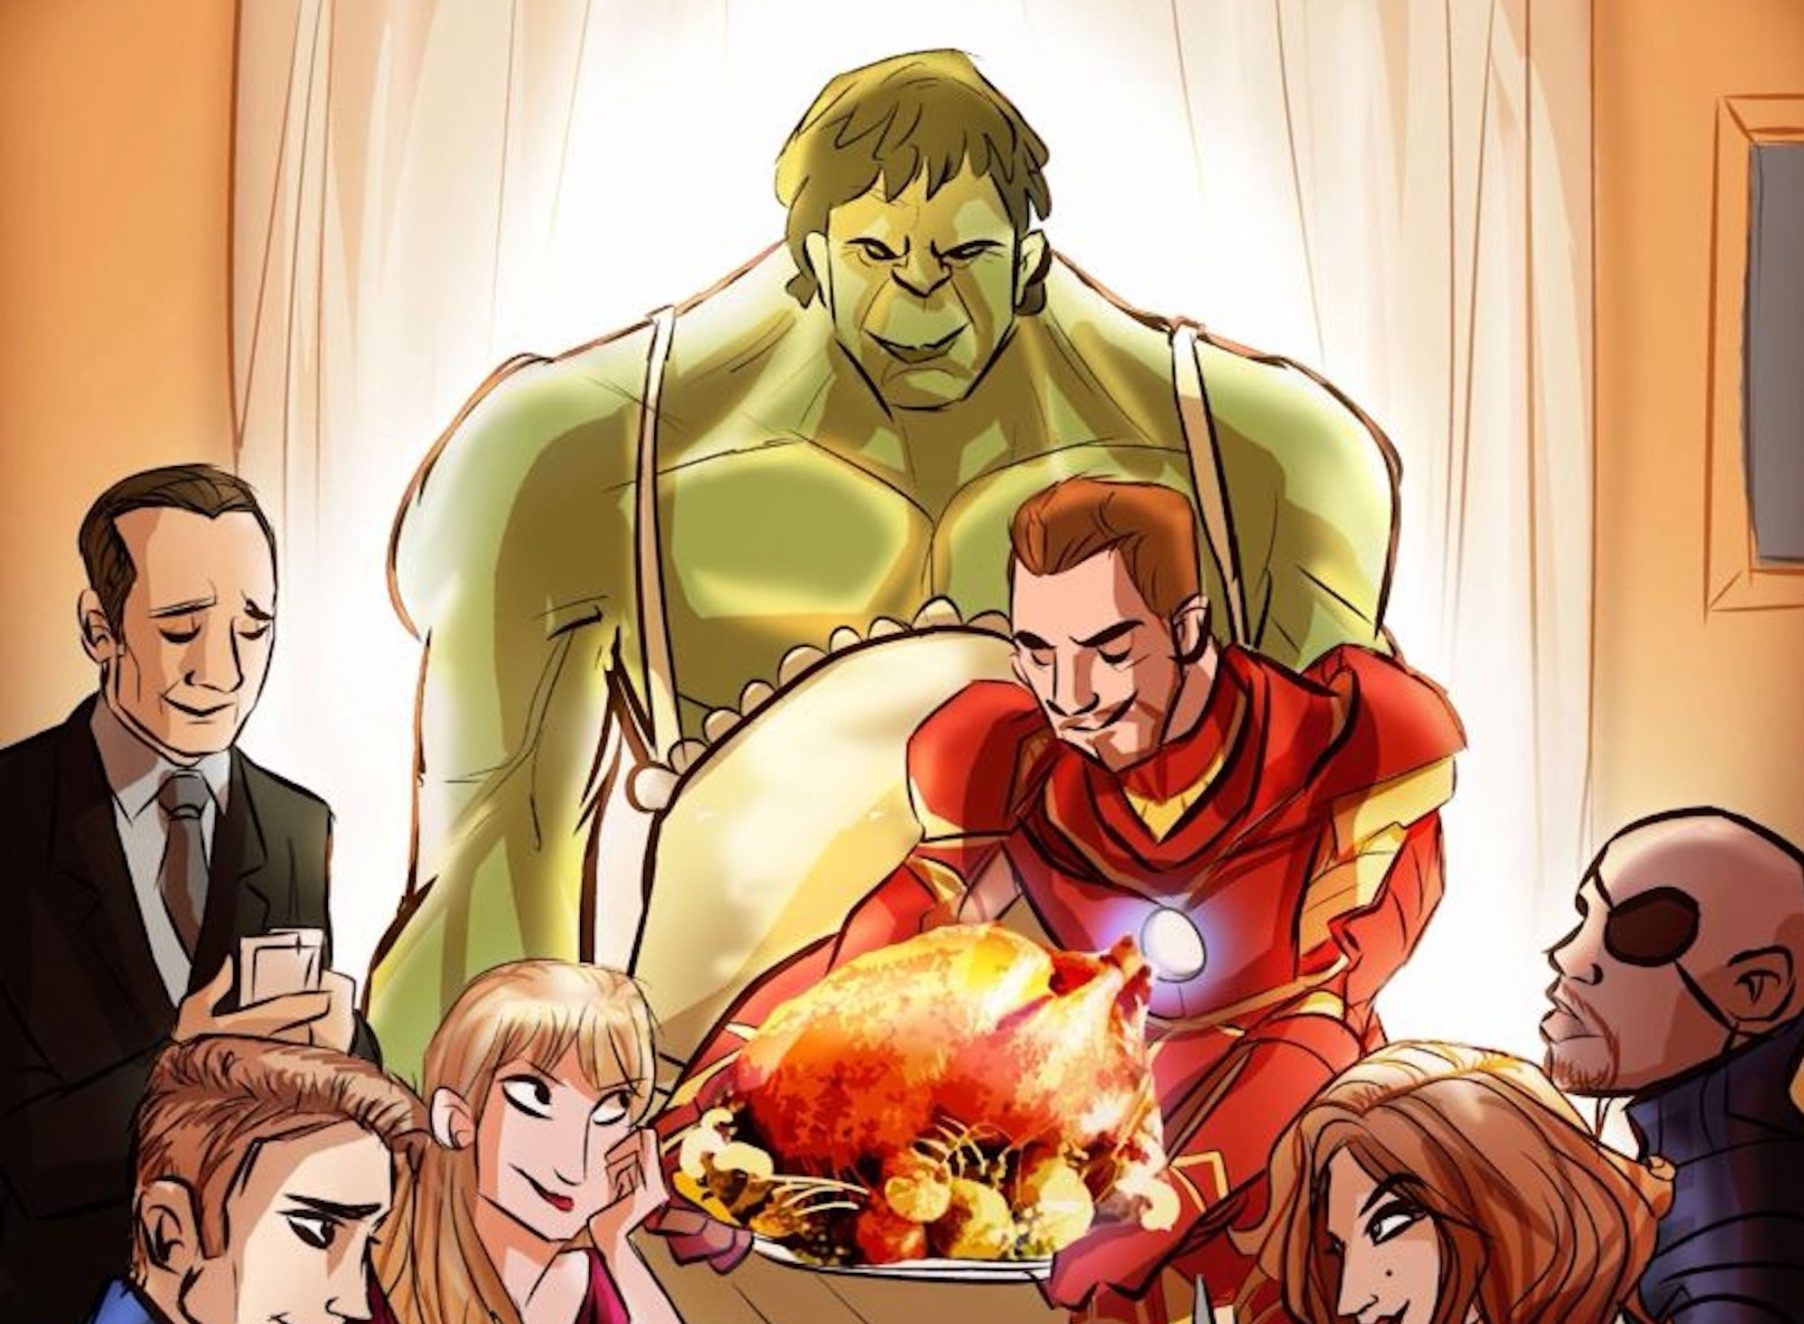 This image is an illustration of the Avengers enjoying Thanksgiving dinner together.